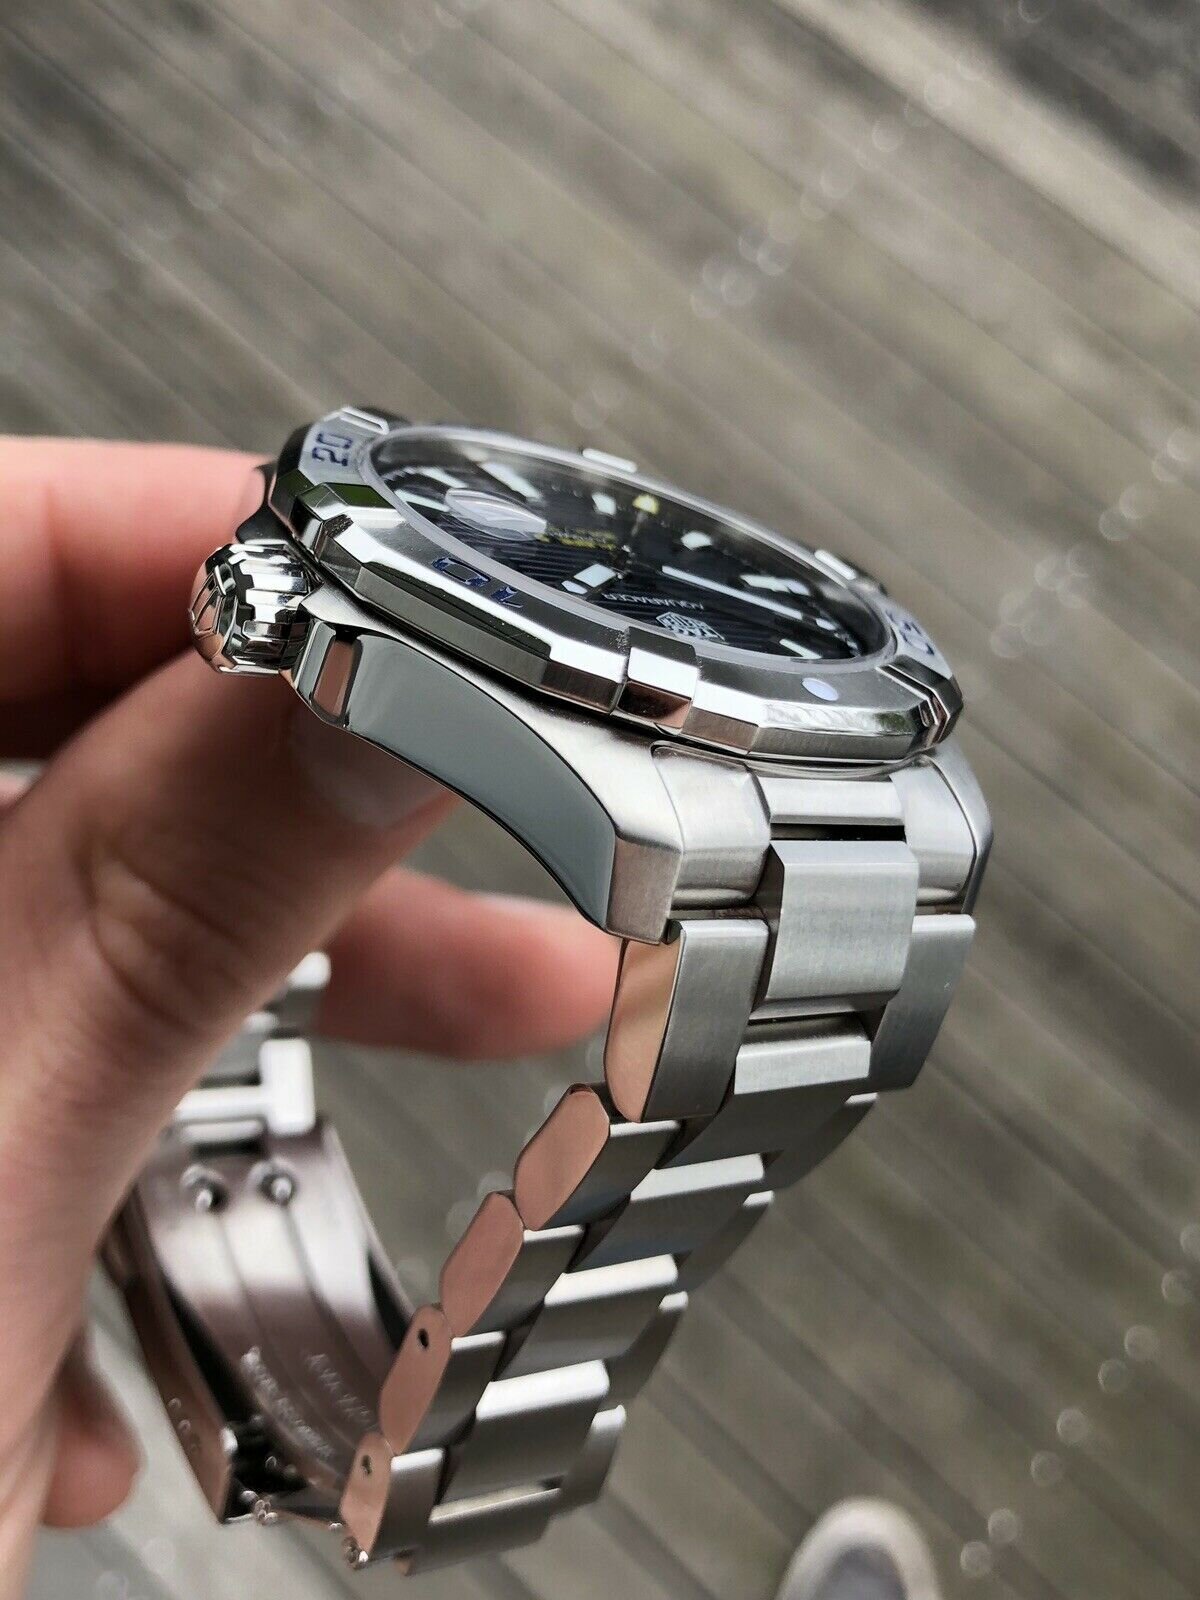 TAG Heuer Aquaracer 300M Chronograph for $1,642 for sale from a Private  Seller on Chrono24